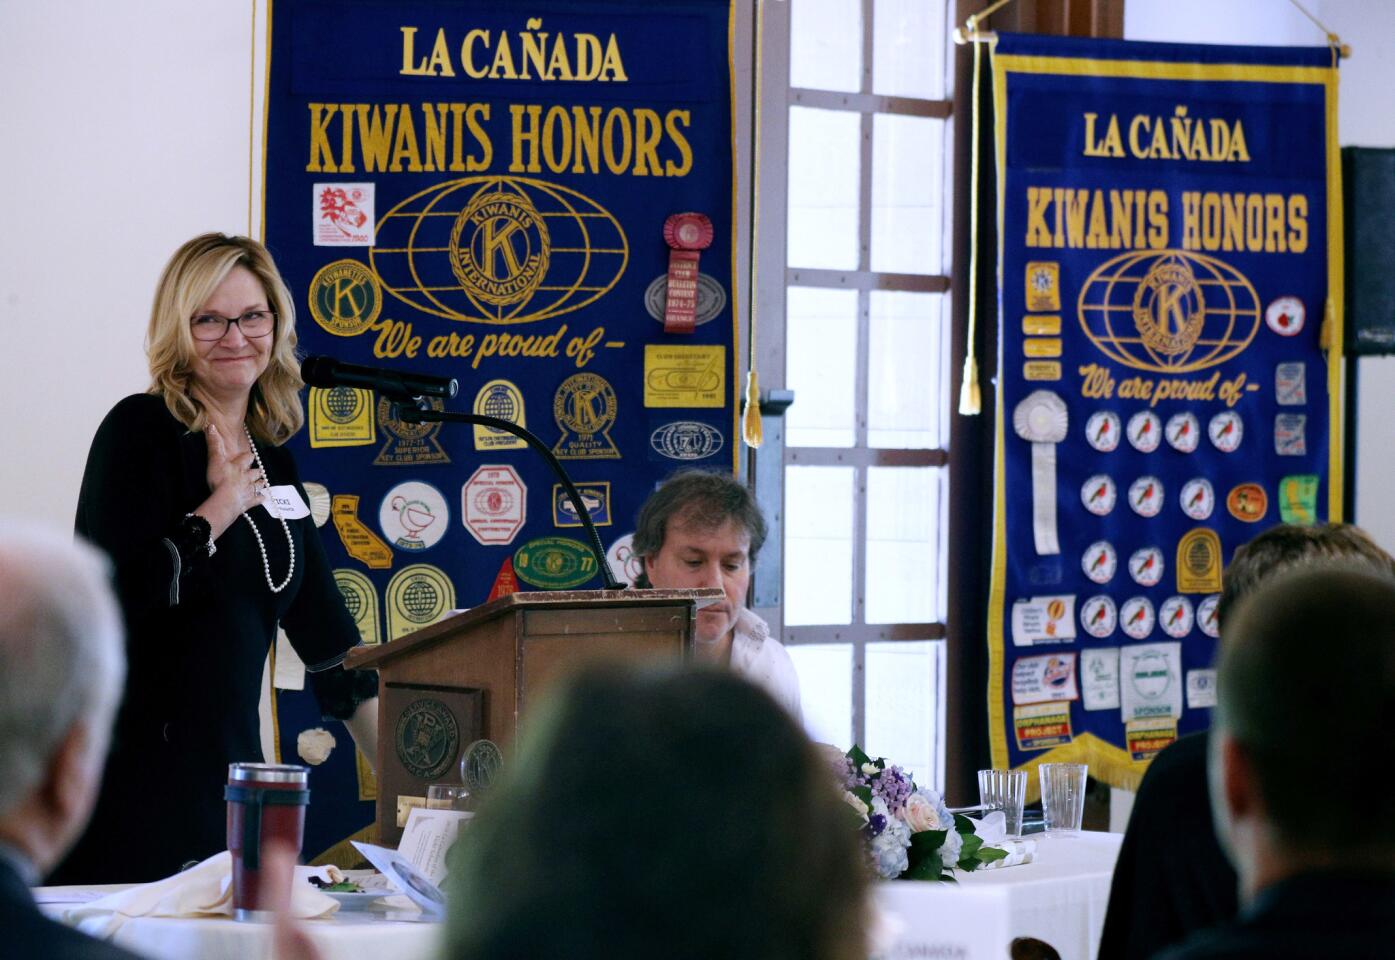 Honoree Vicki Schwartz speaks to those gathered at the Kiwanis Club of La Canada 2018 La Canadan of the Year luncheon, at Descanso Gardens in La Canada Flintridge on Wednesday, April 24, 2019.